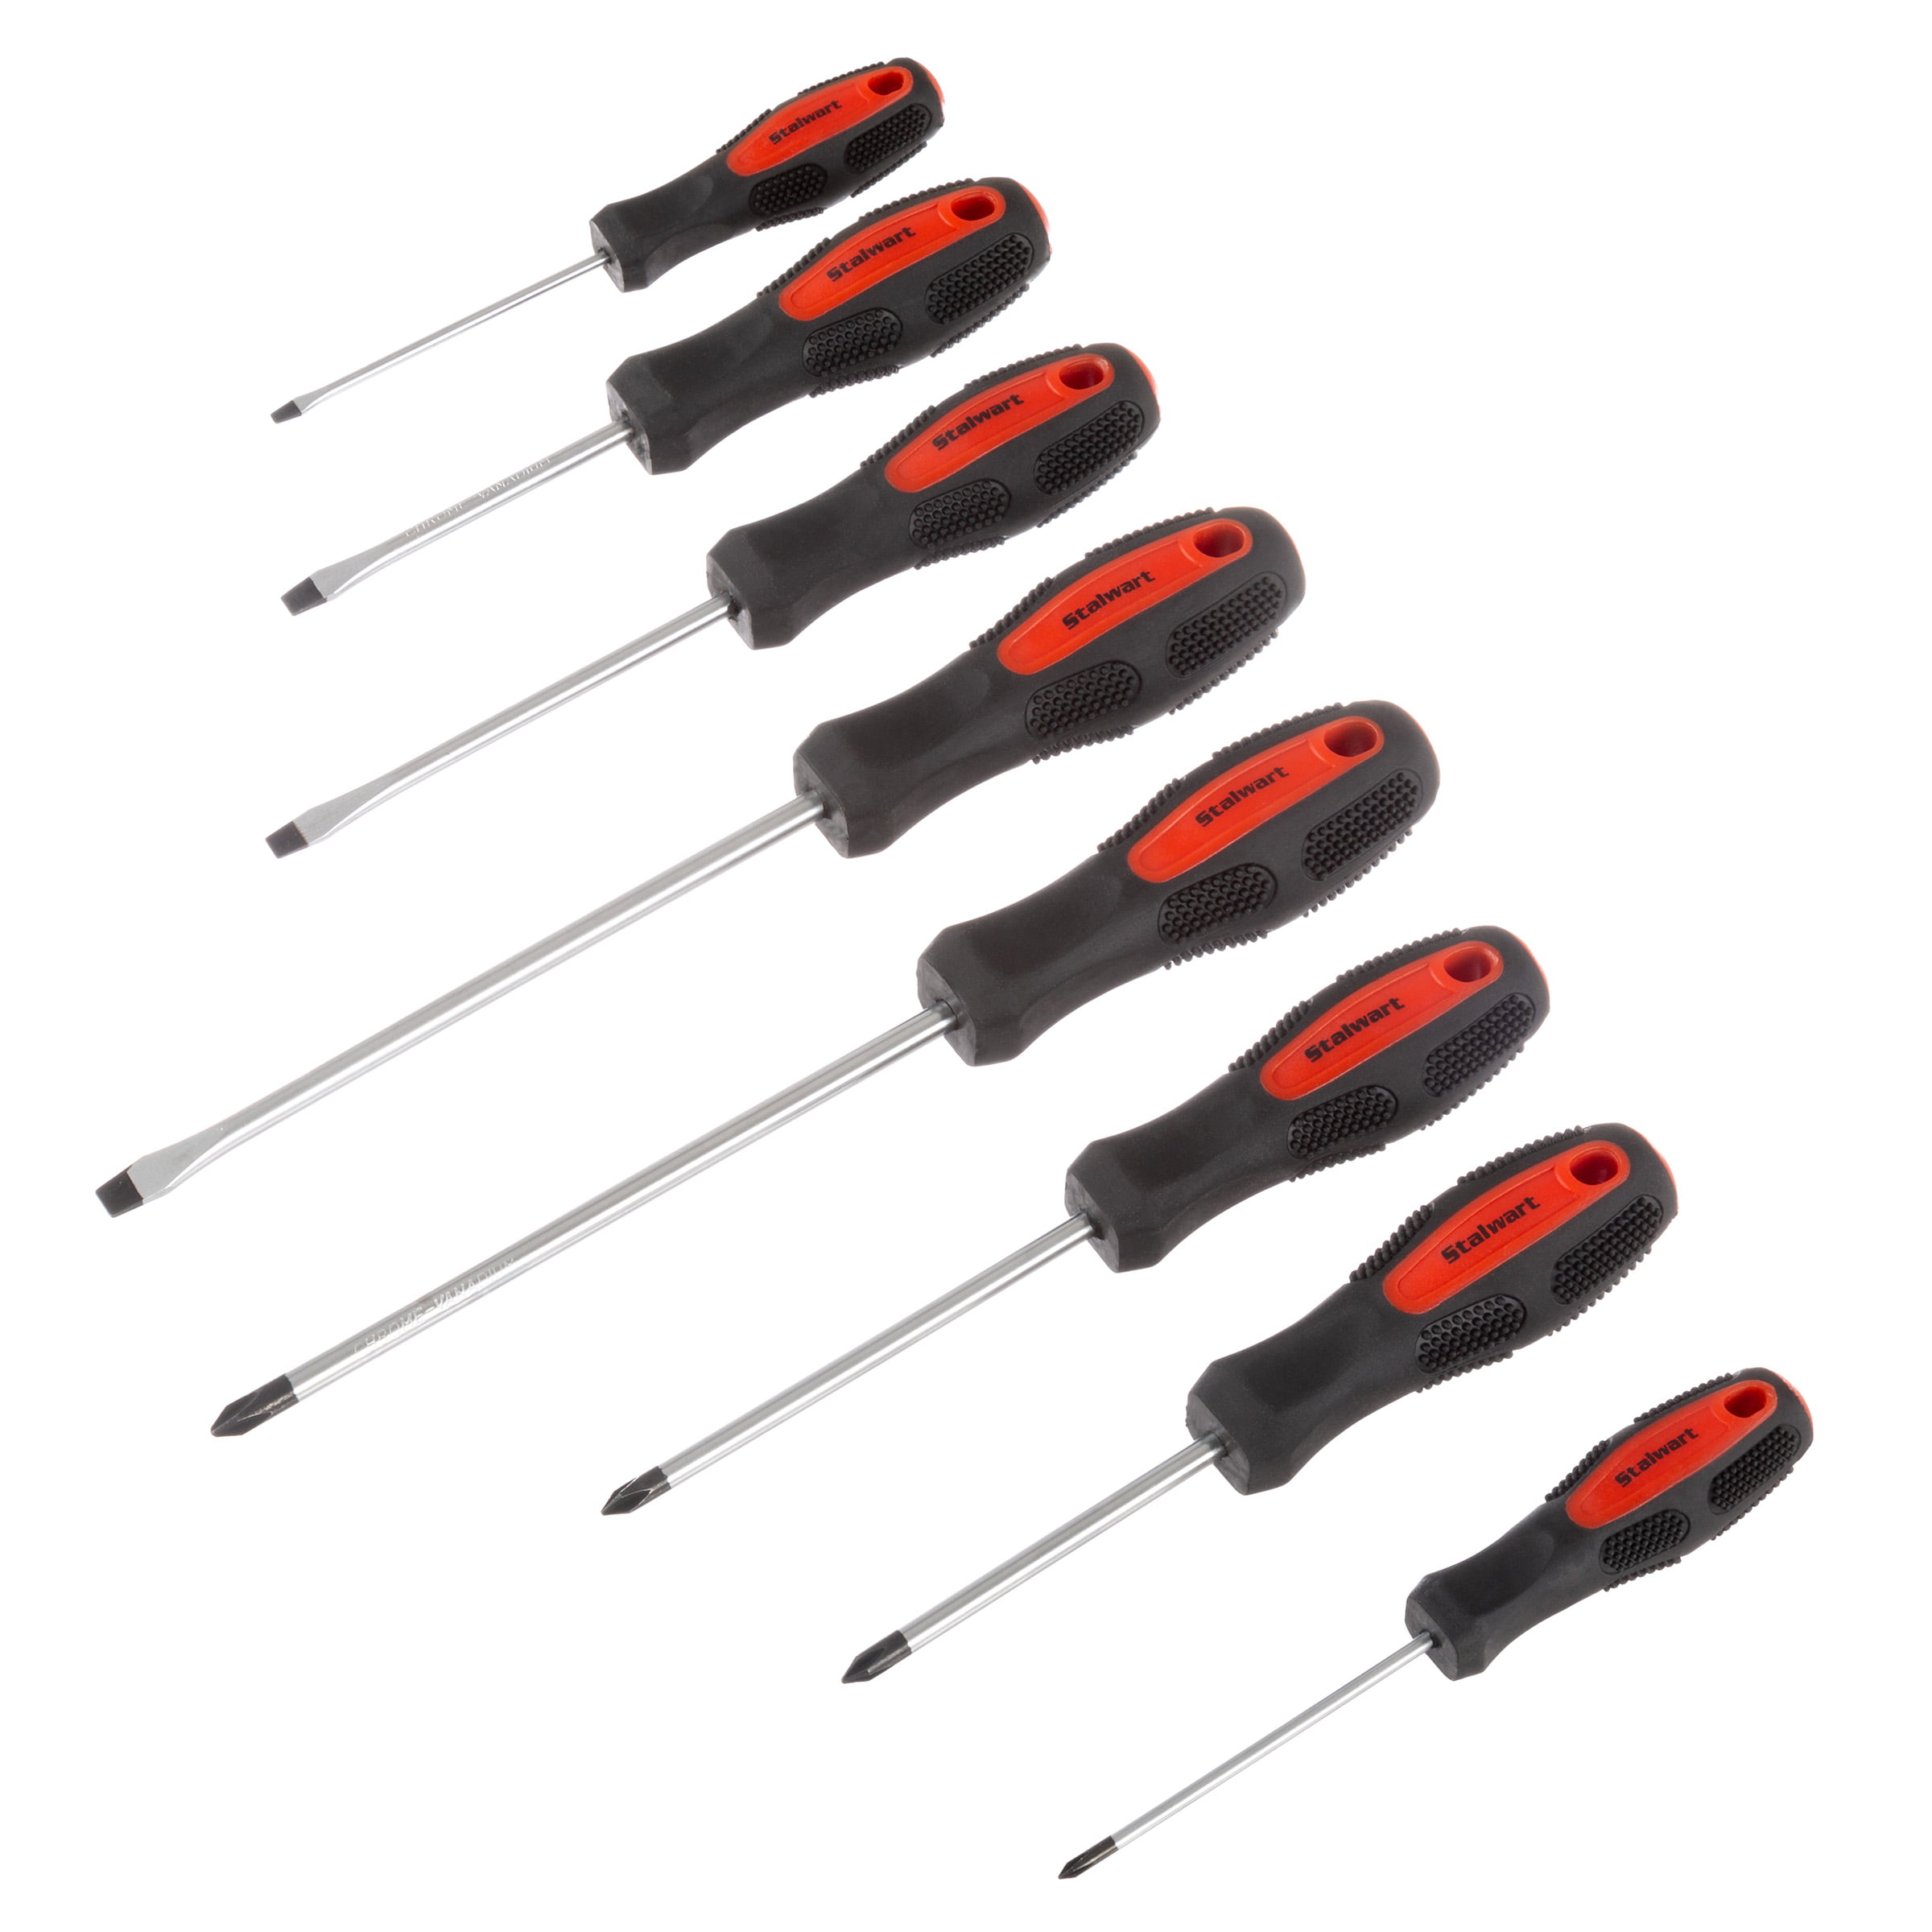 8 Piece Screwdriver Combination ?– Magnetic Phillips and Slotted Head Hand Tools with Ergonomic Handles for Professionals by Stalwart - Walmart.com